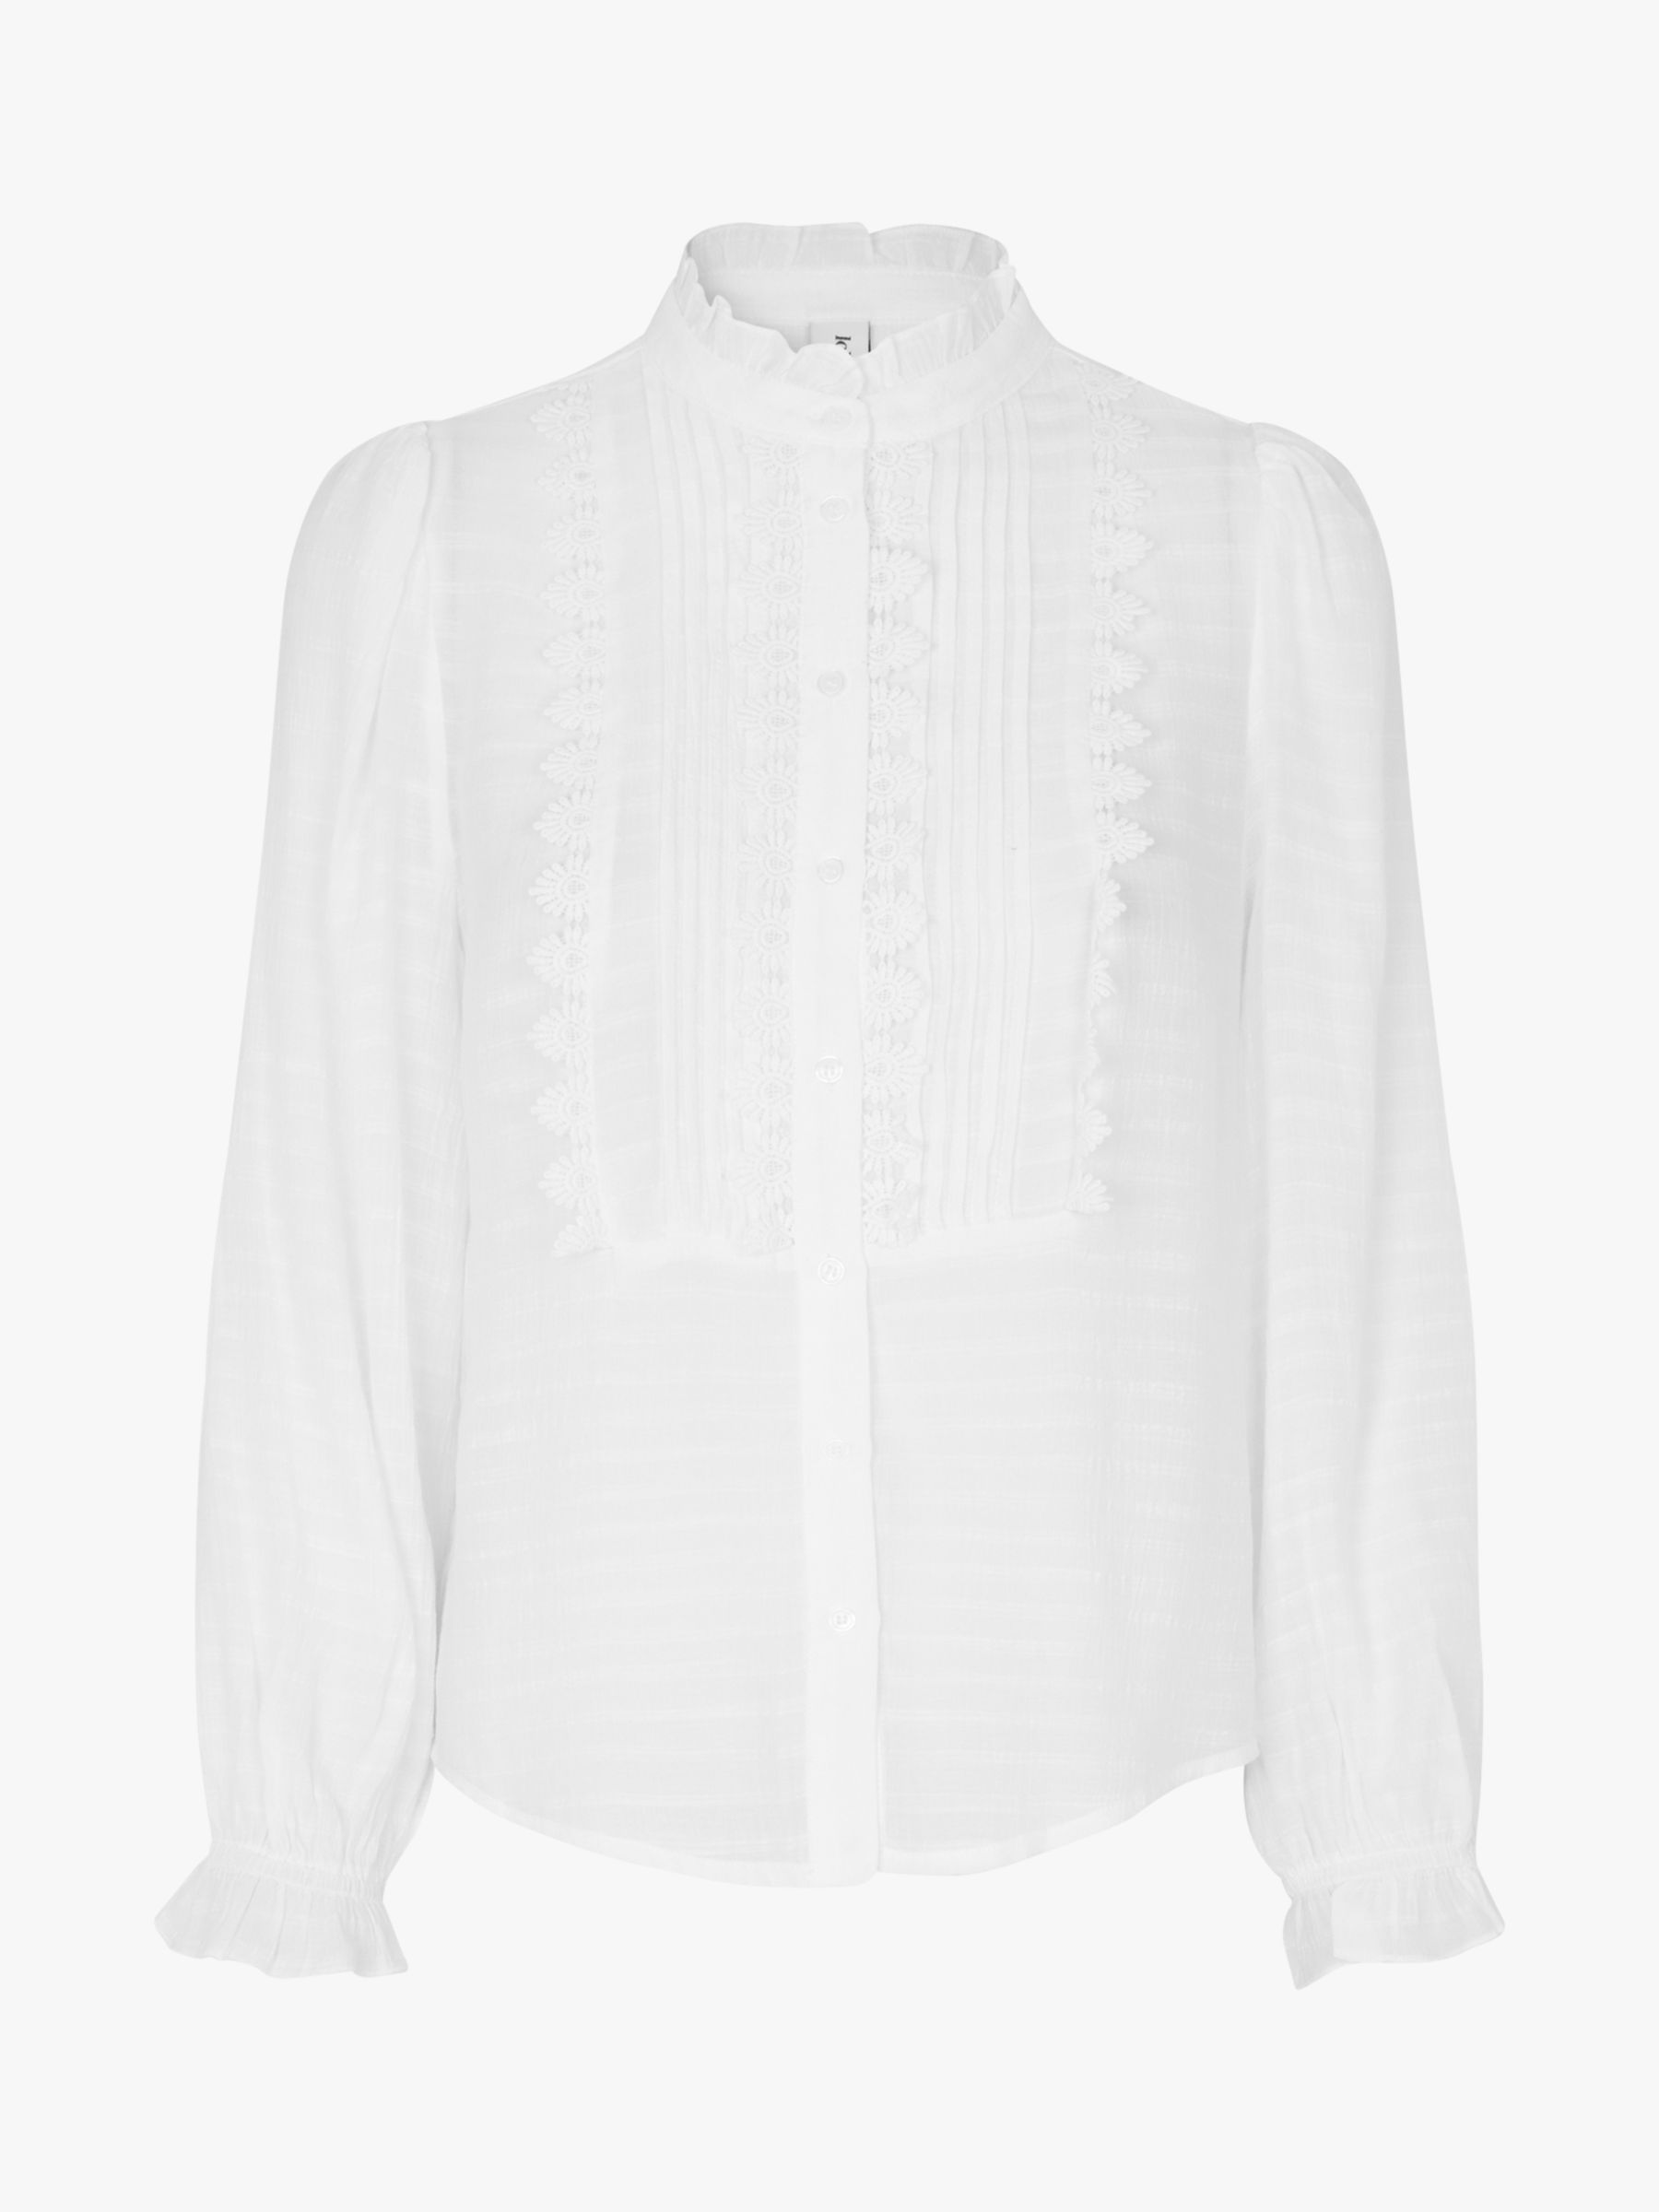 Lollys Laundry Ariel Frill and Embroidery Shirt, White at John Lewis ...